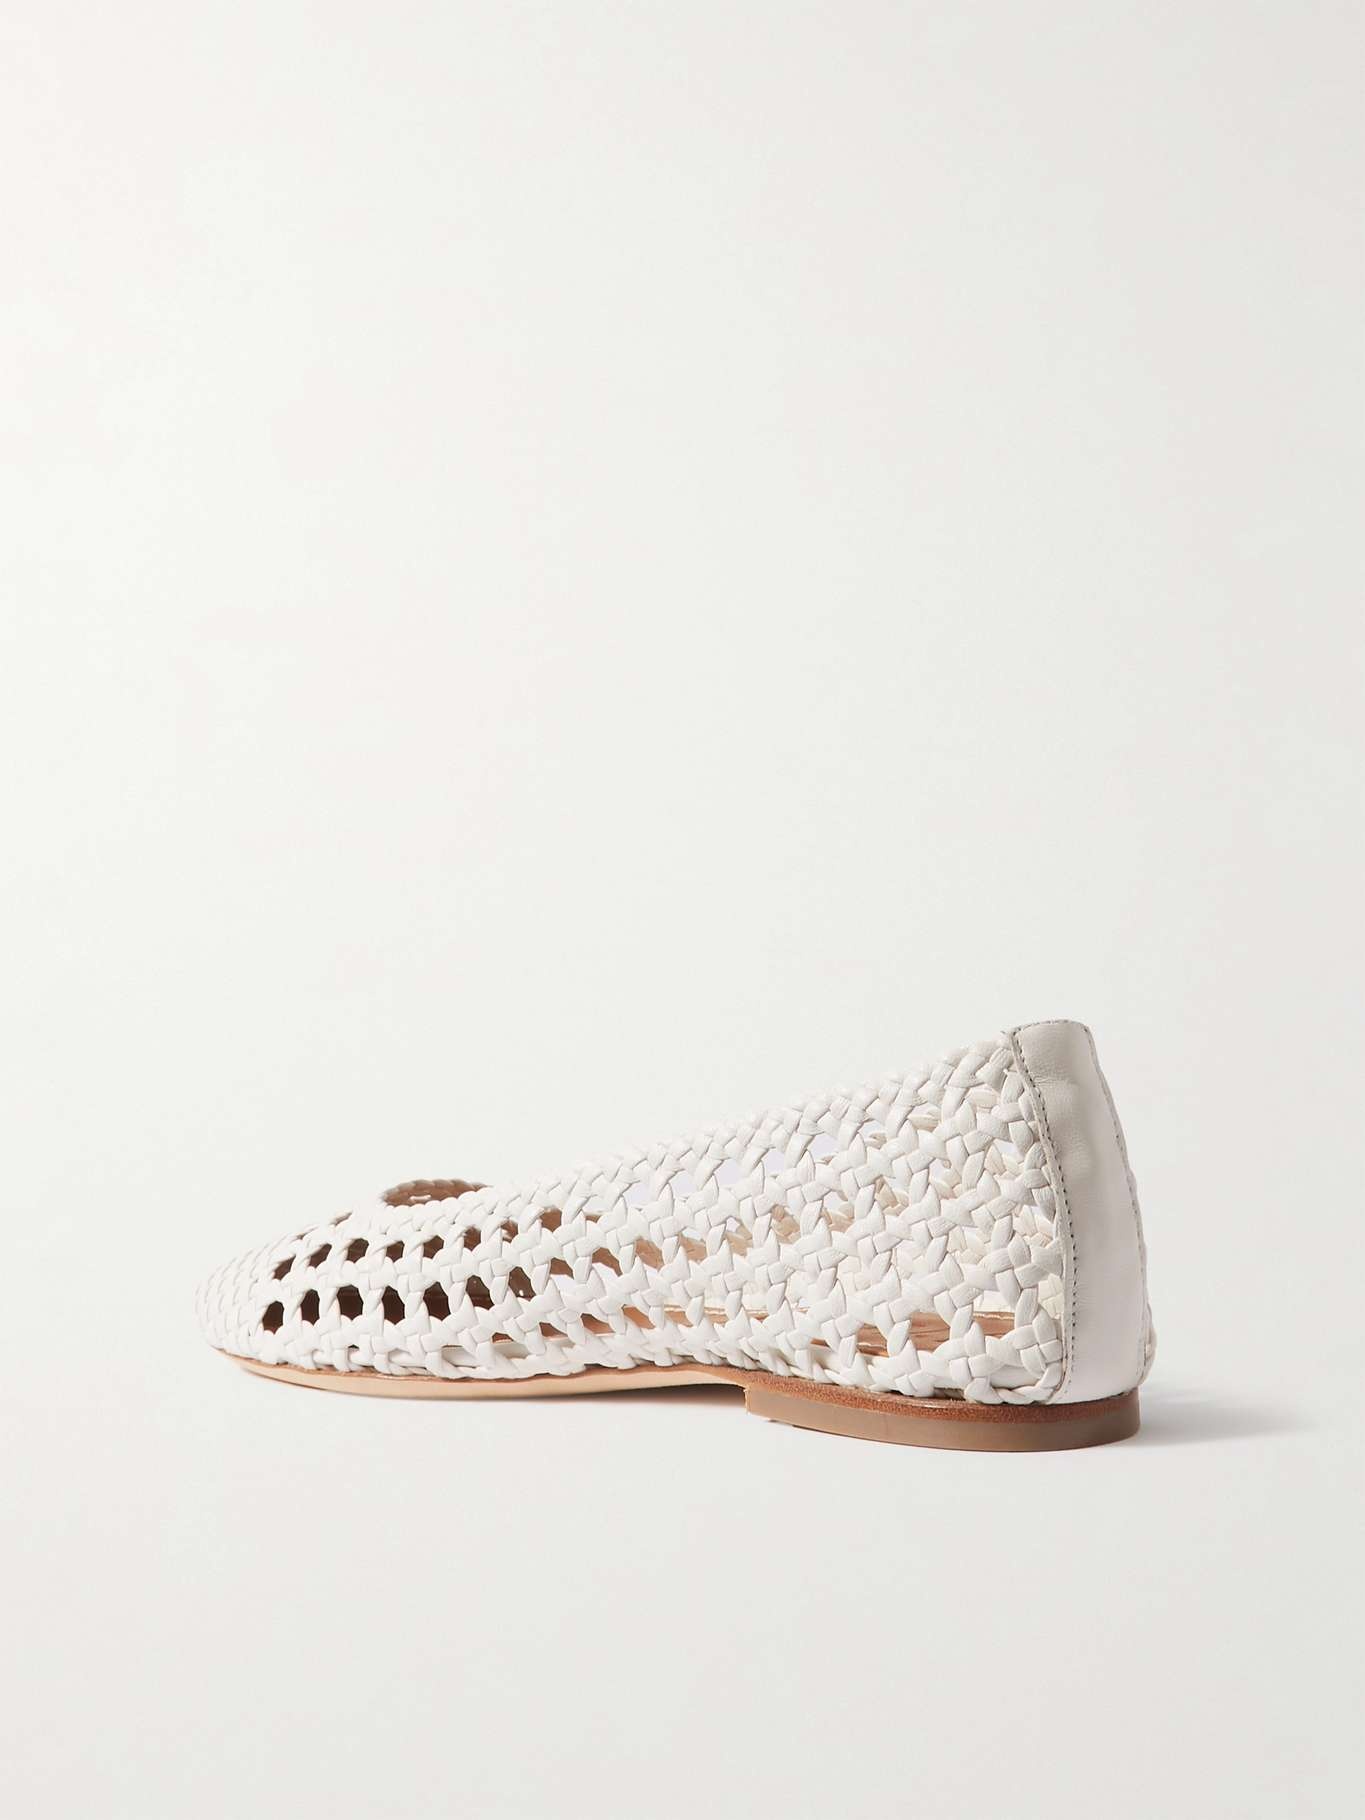 Nell woven leather ballet flats - 3